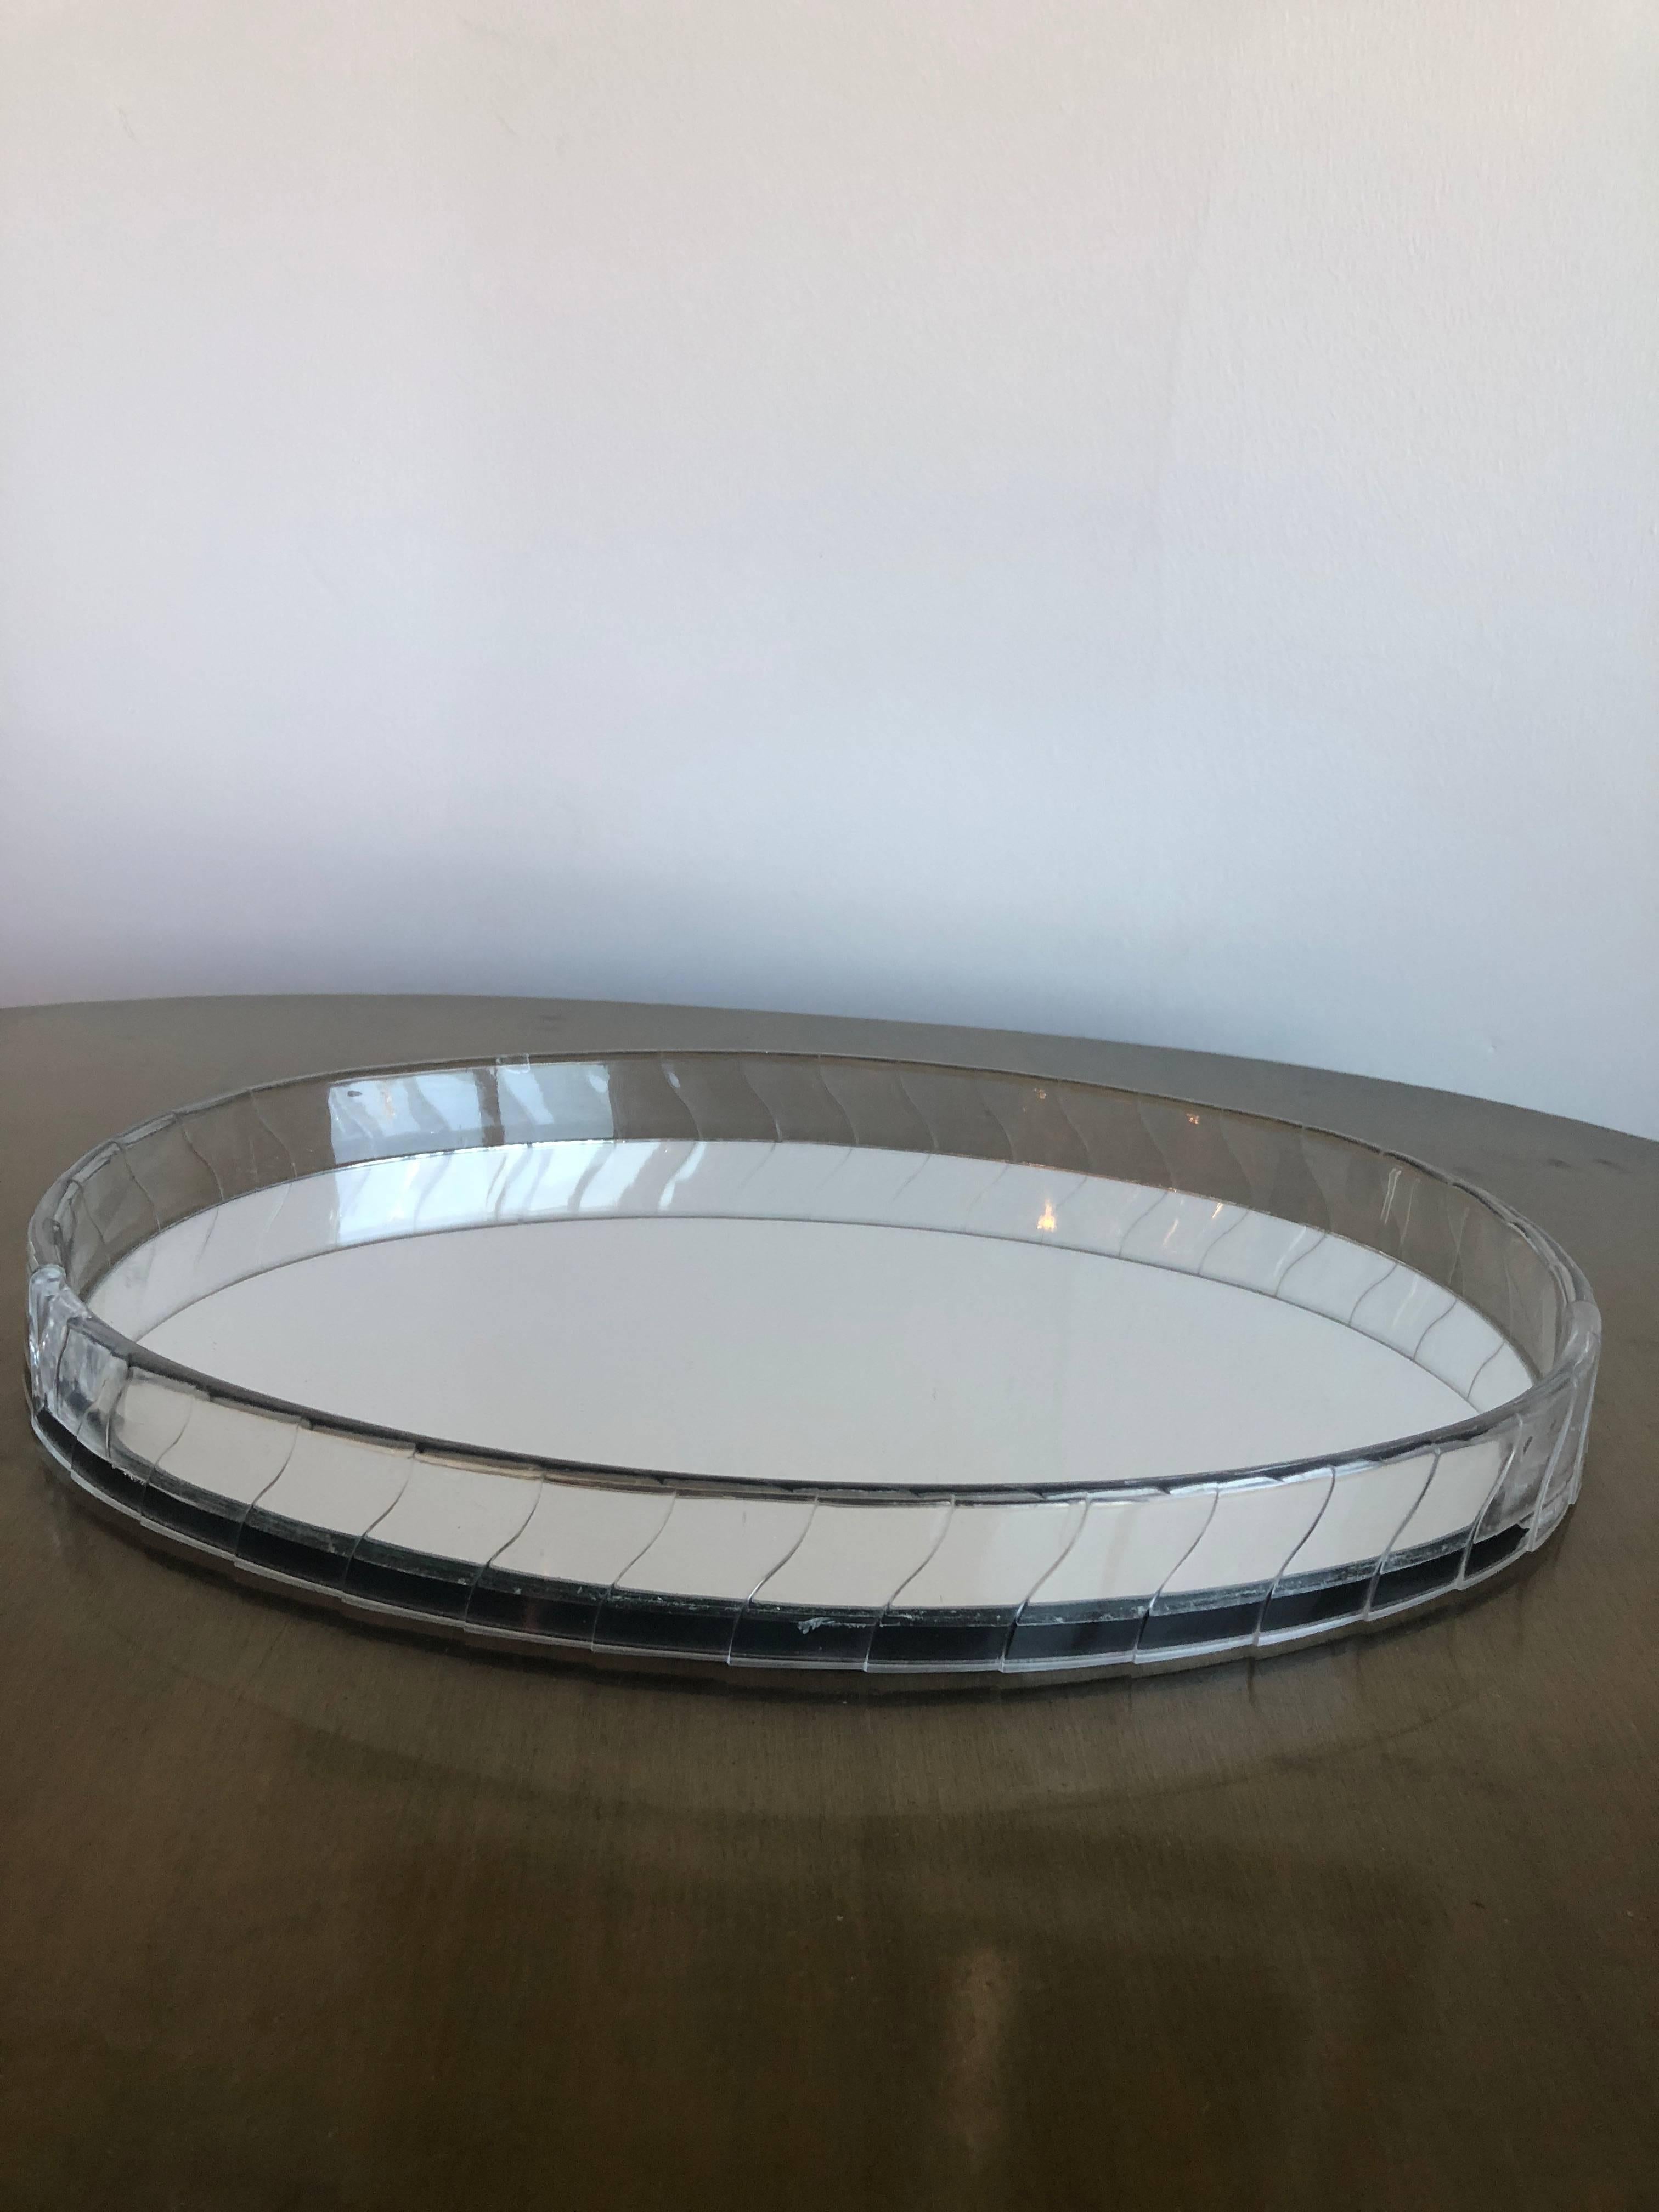 Offered is an Art Deco / Hollywood Regency Glam oval Lucite mirrored decorative vanity / drinks tray. This stunning shimmering oval tray captures the style of Hollywood's Golden Years. The tray is formed out of two pieces of curved acrylic cast to